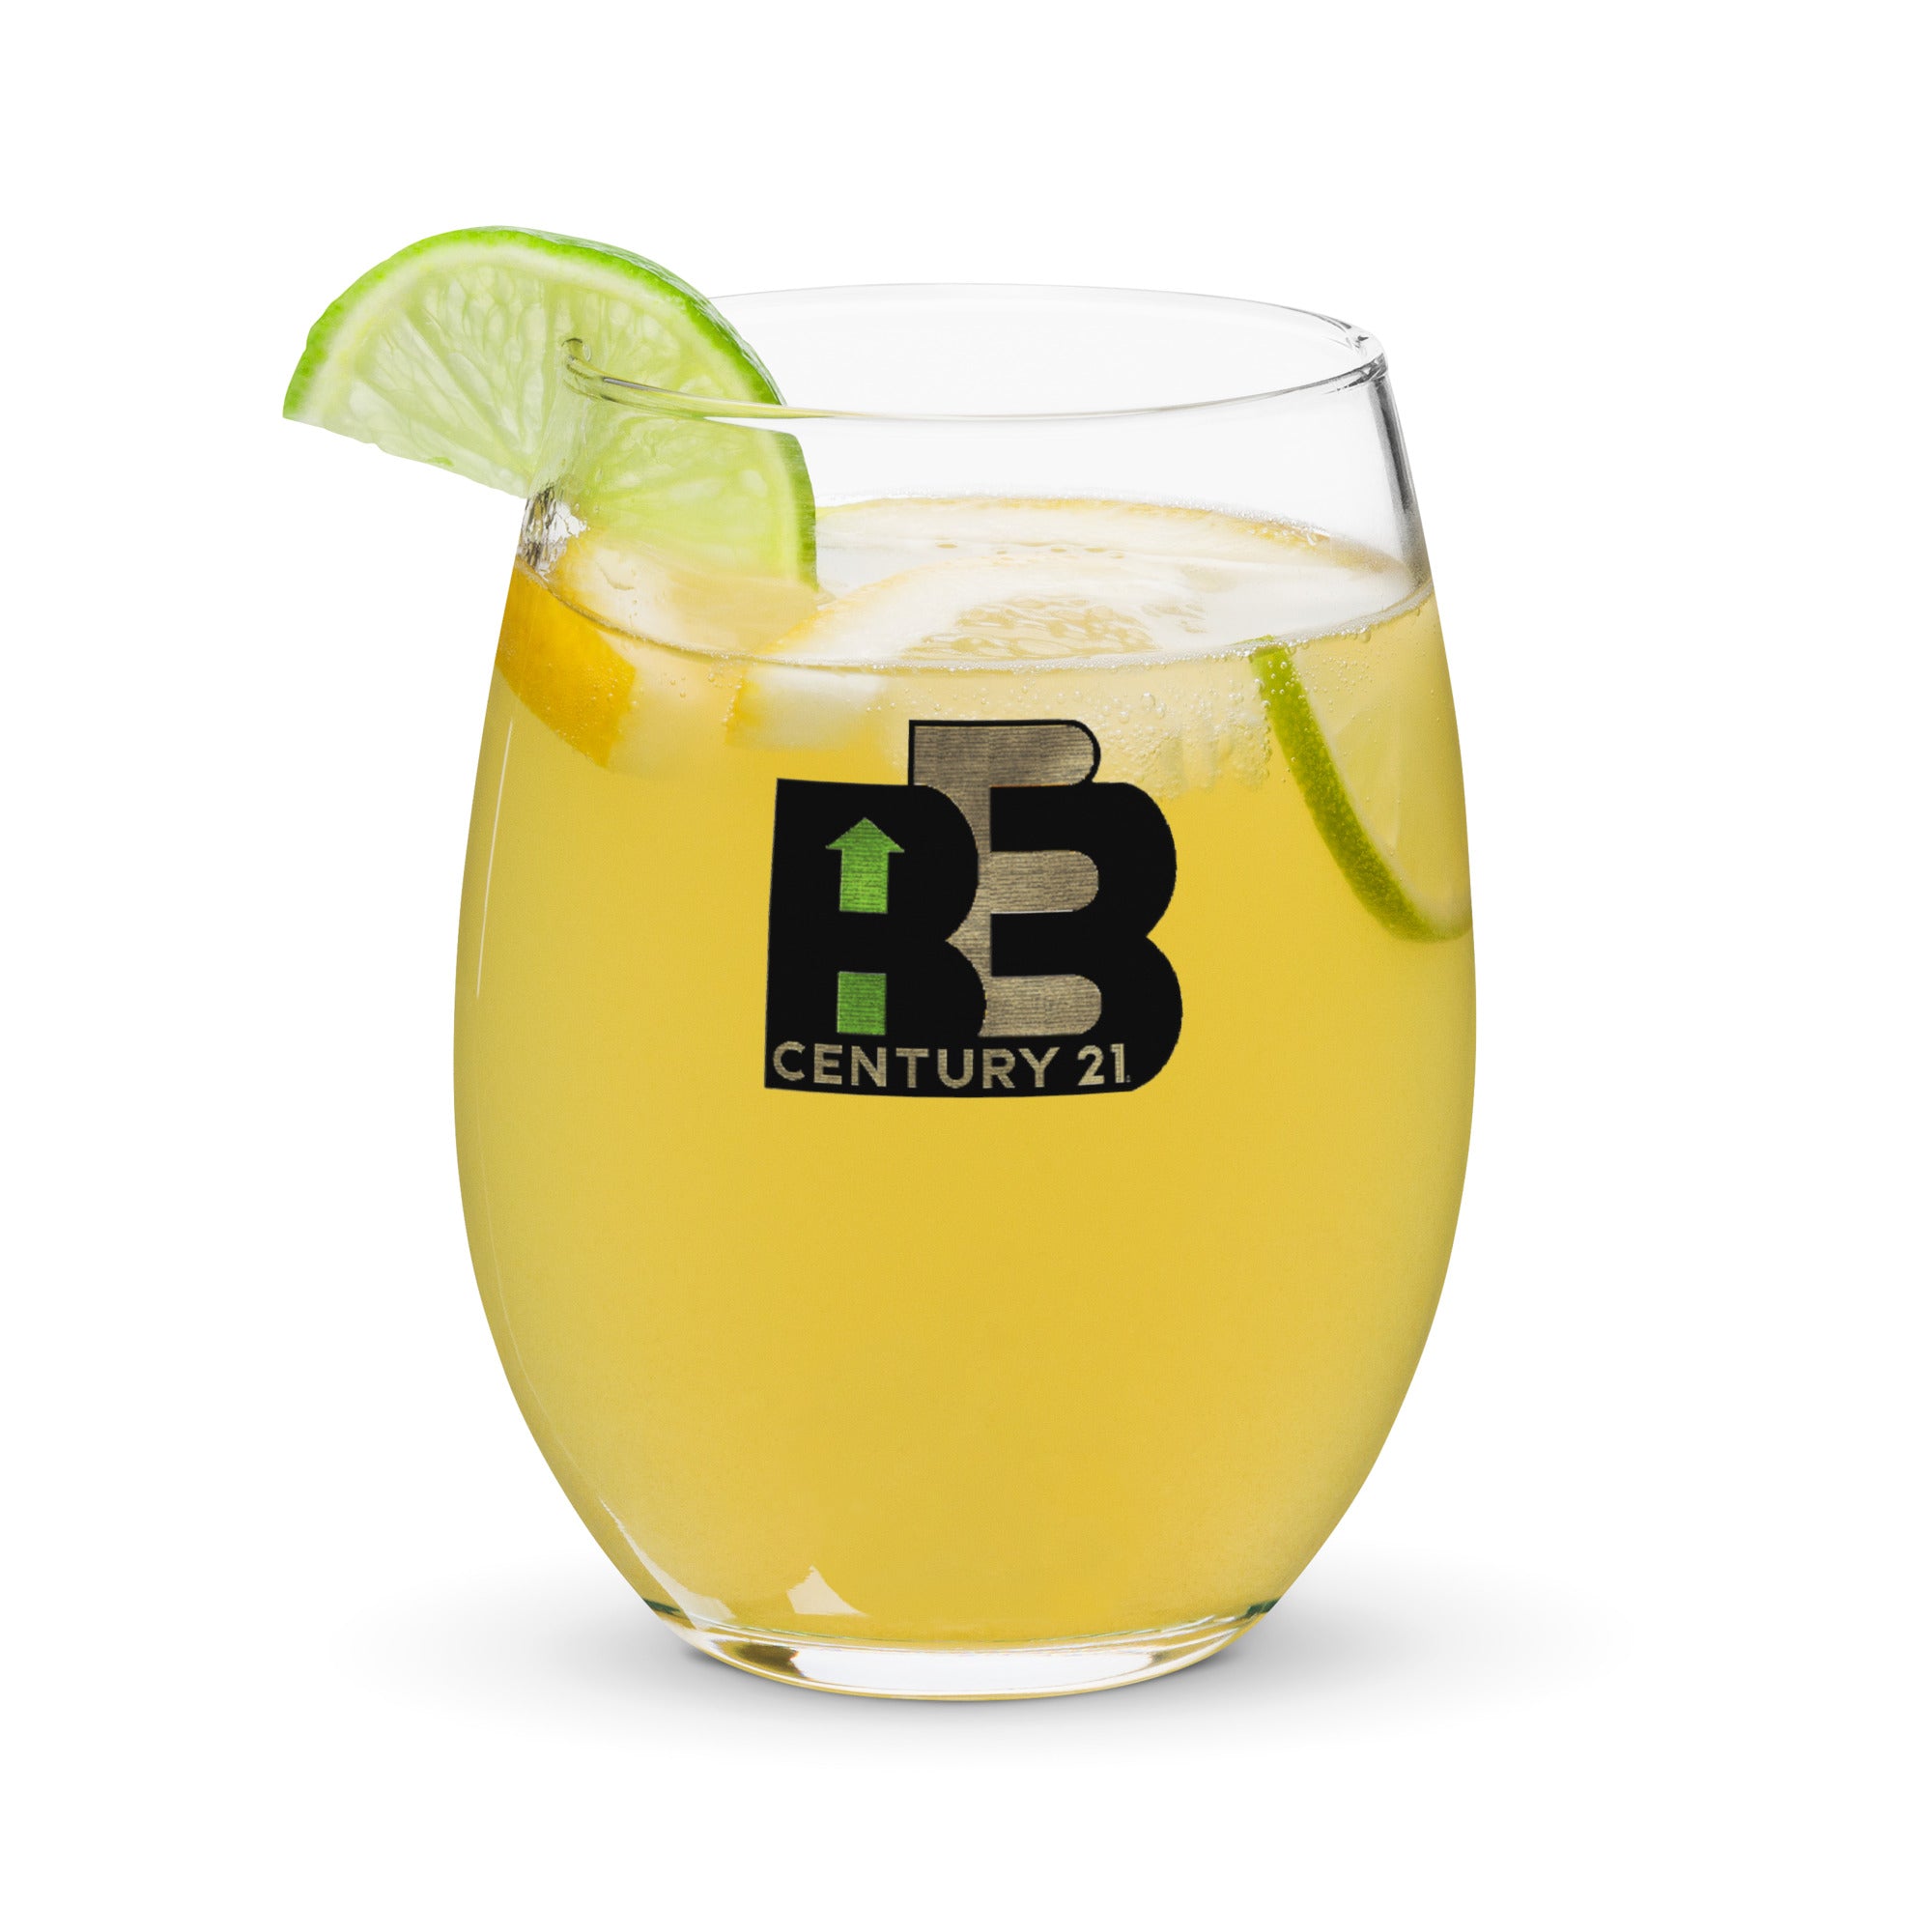 BE3 Seal Stemless wine glass